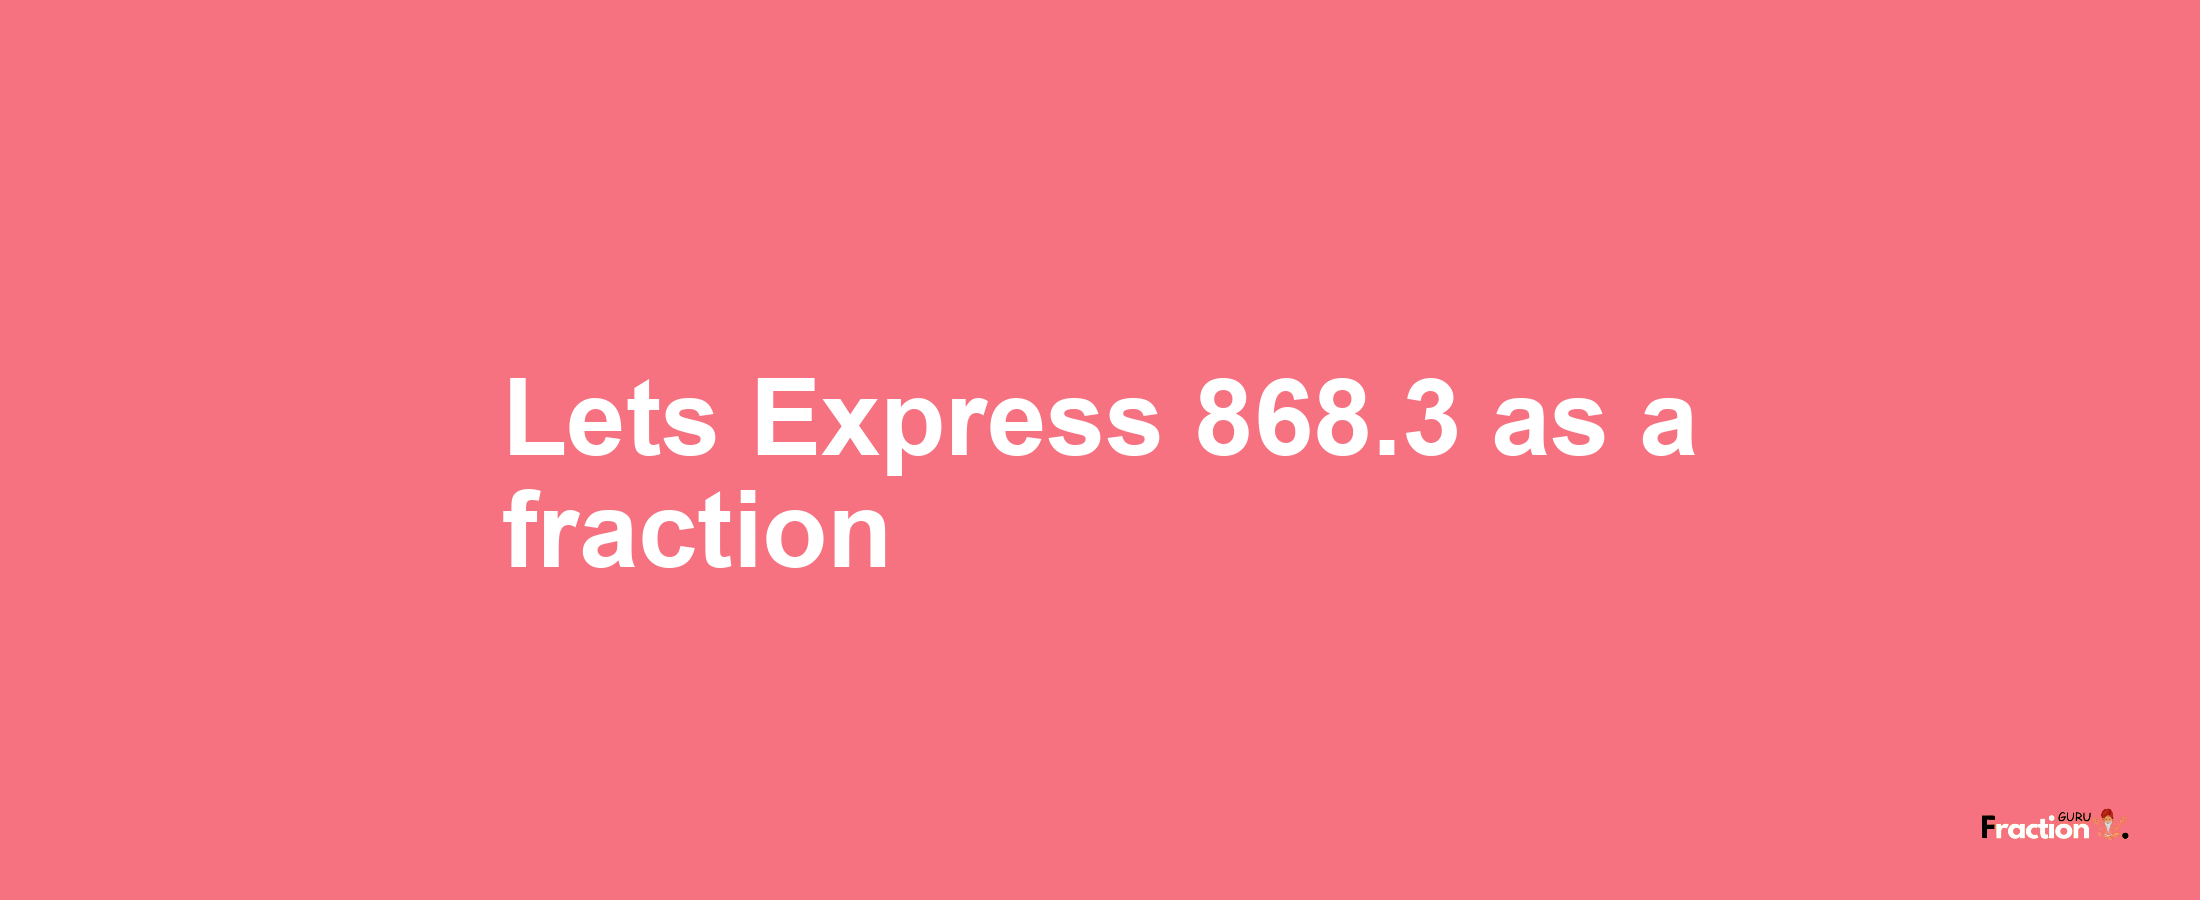 Lets Express 868.3 as afraction